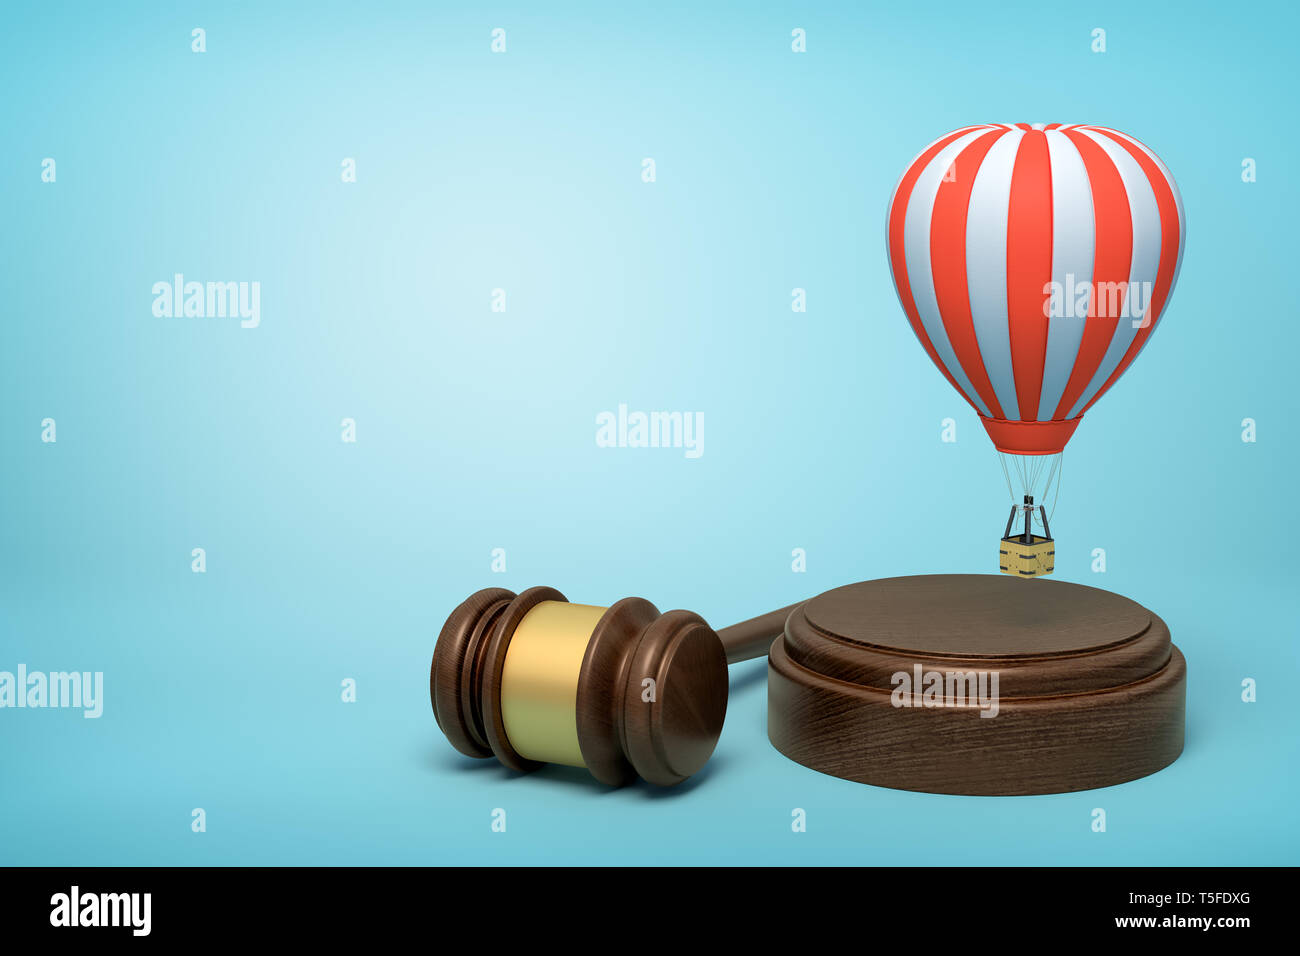 3d rendering of small striped hot-air balloon in air above brown sound block with gavel beside on light-blue background with copy space. Stock Photo